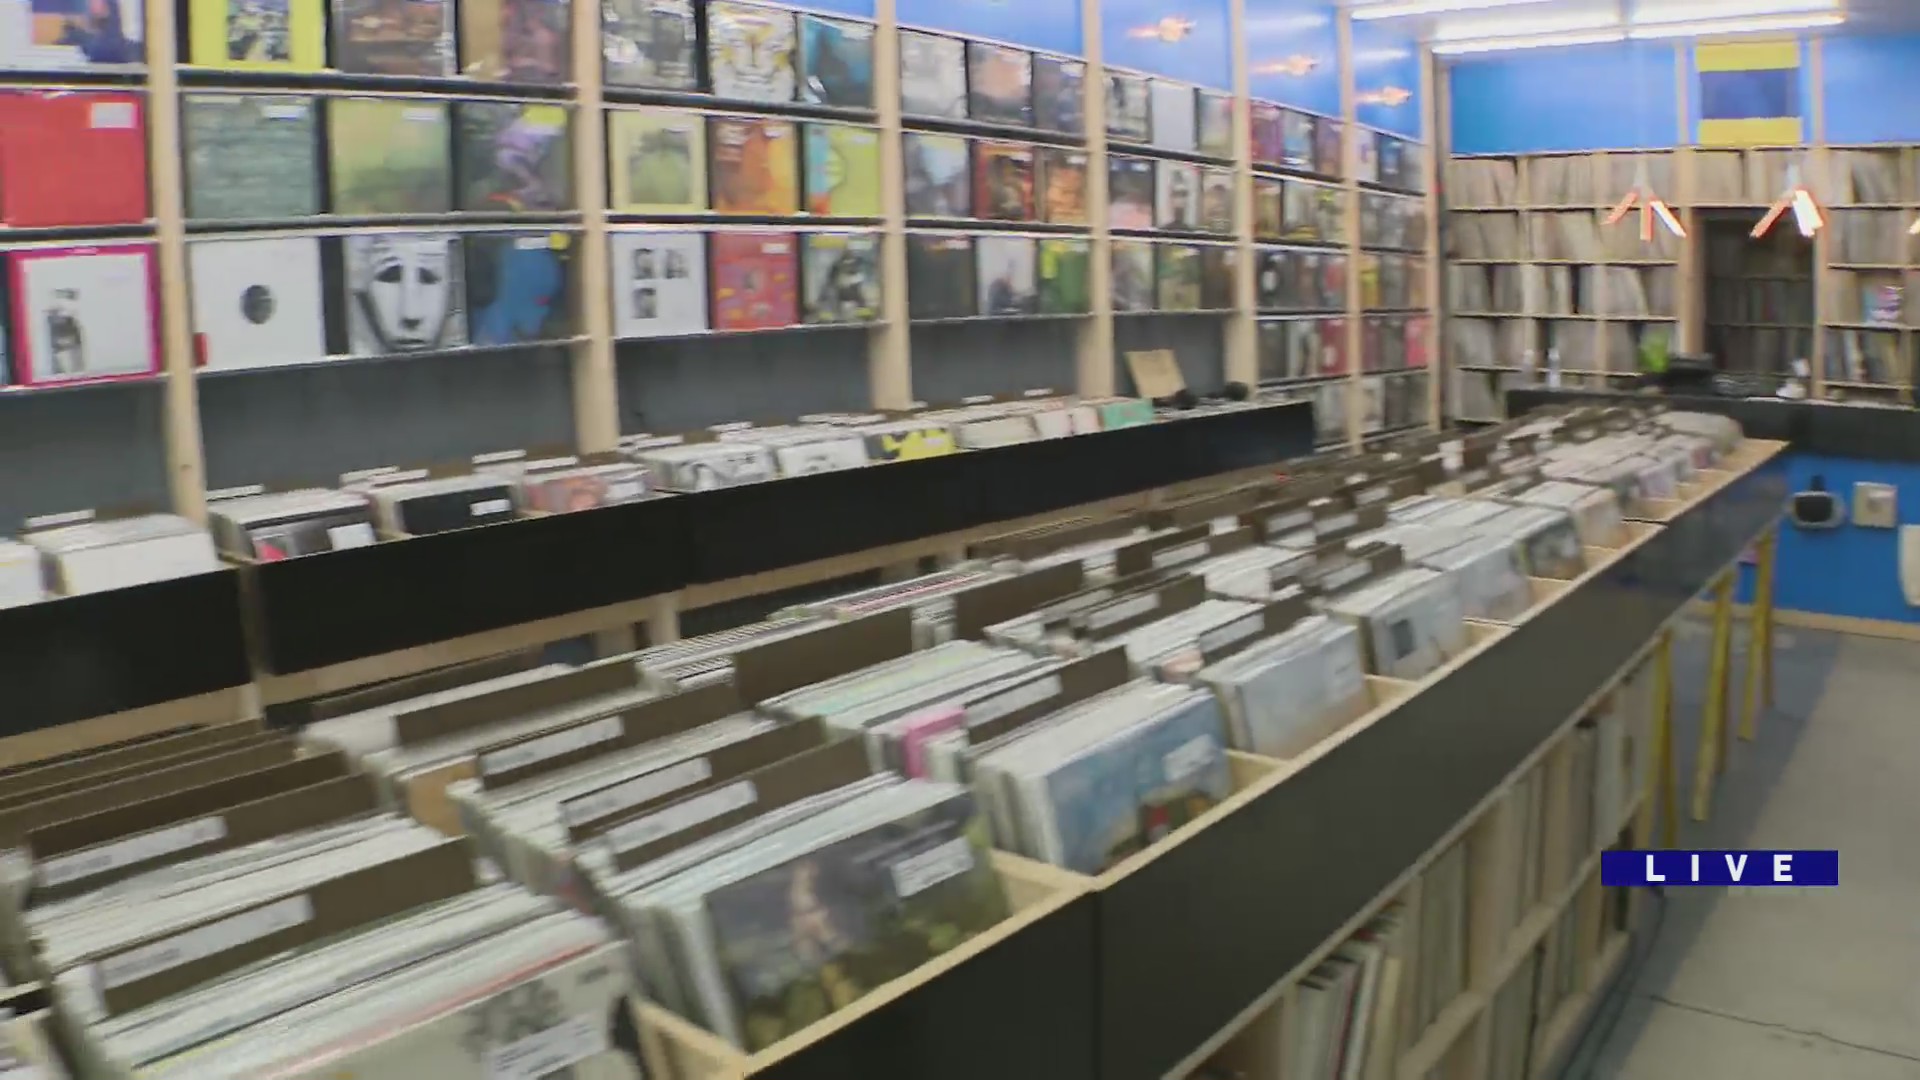 Around Town checks out 606 Records